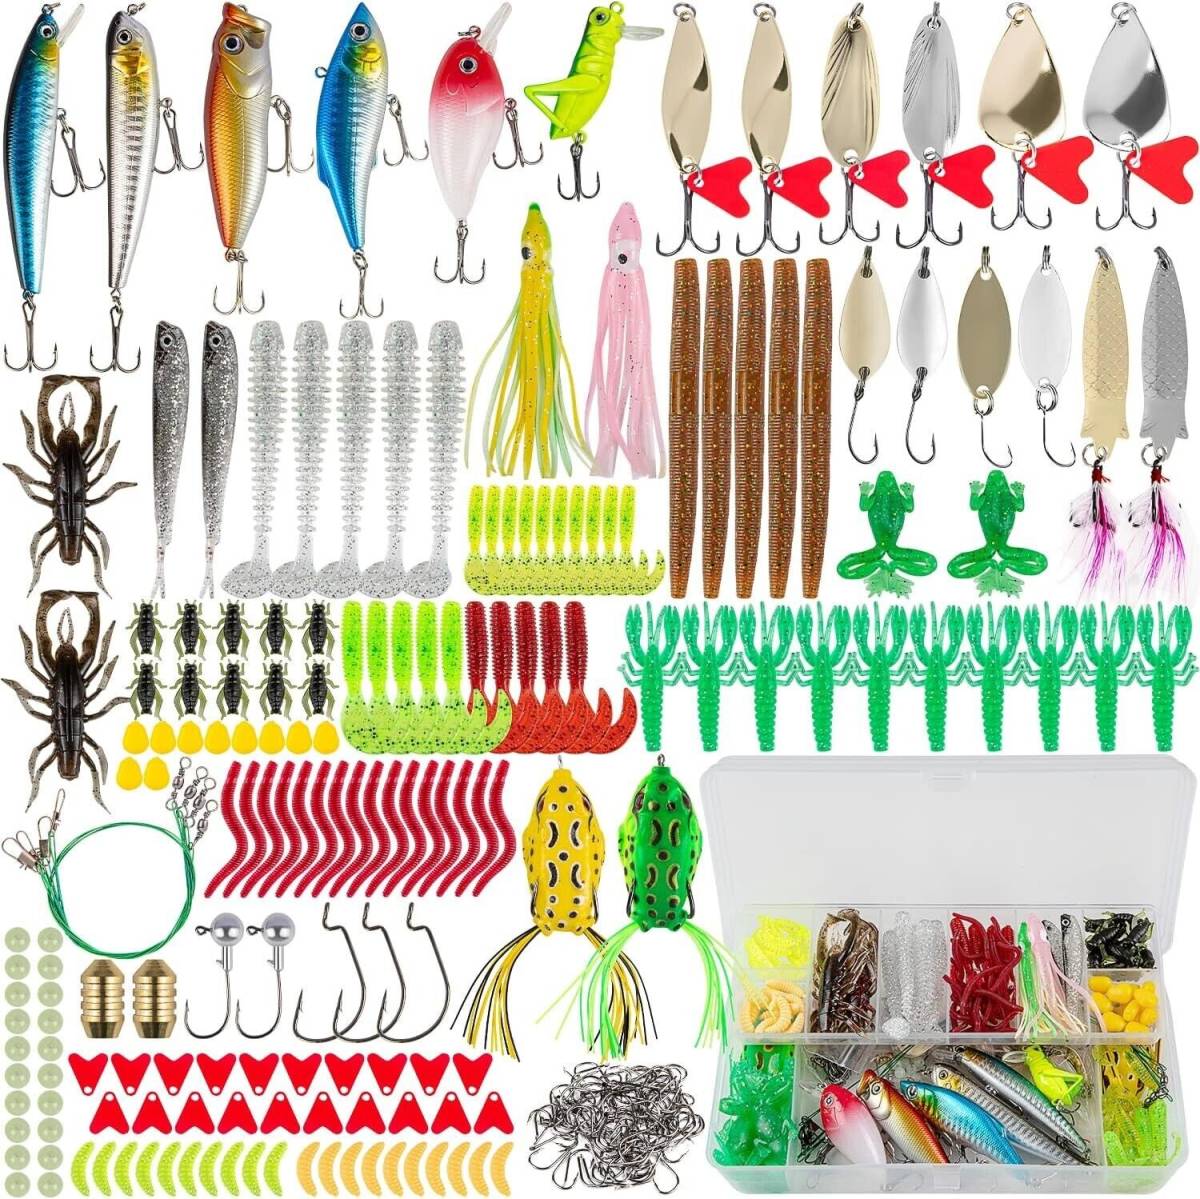 Fishing Lures Kit Freshwater Fishing Tackle Kit for Bass Trout